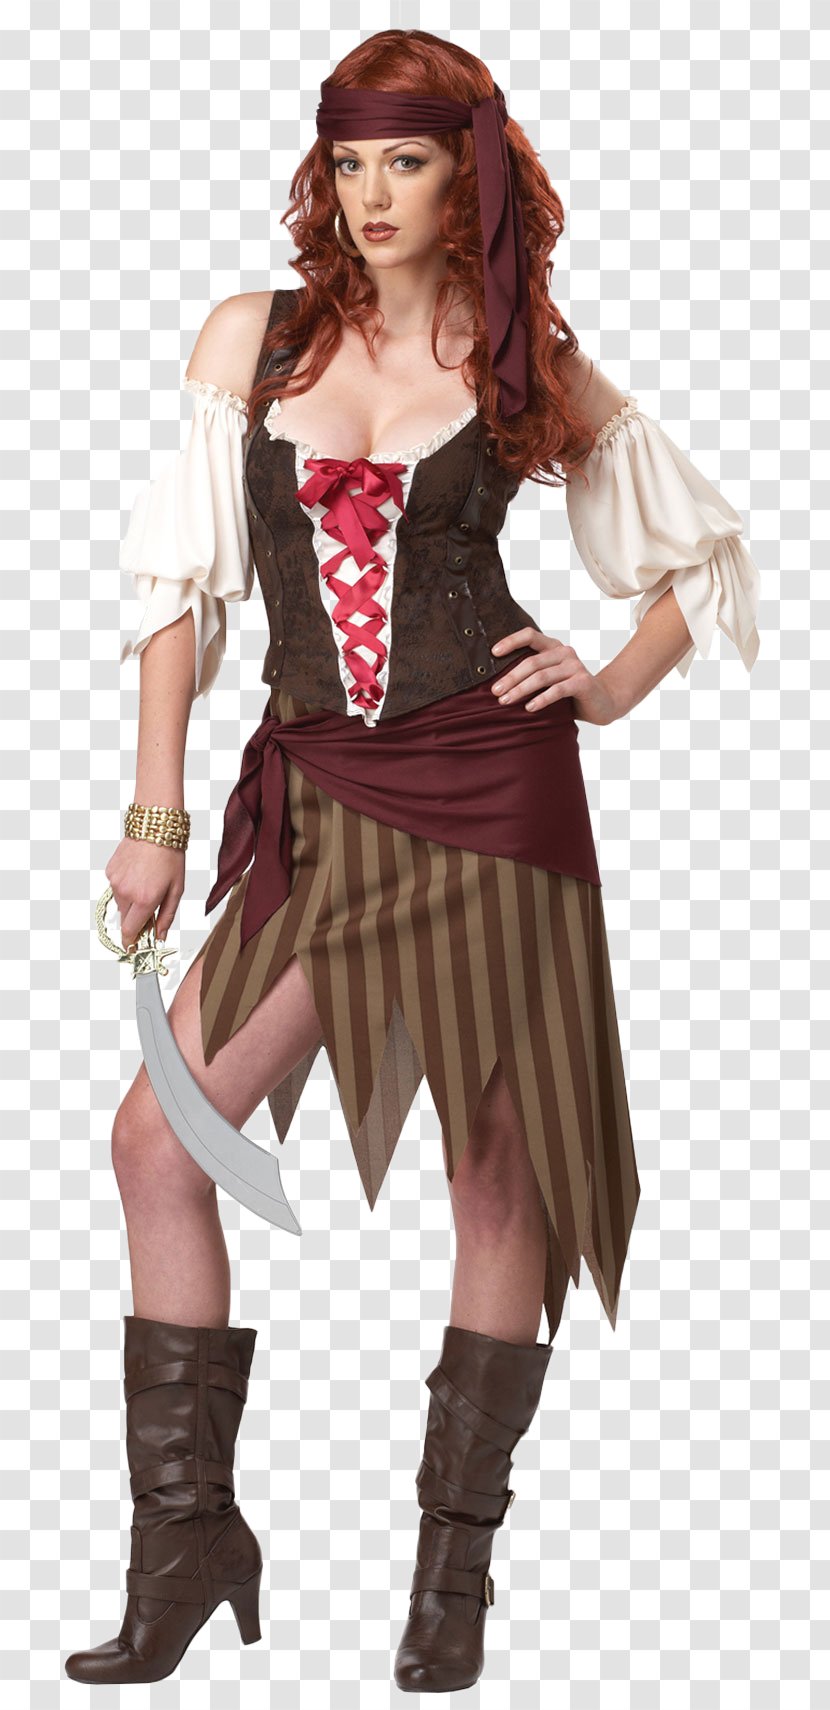 Costume Party Halloween Dress Woman Transparent PNG